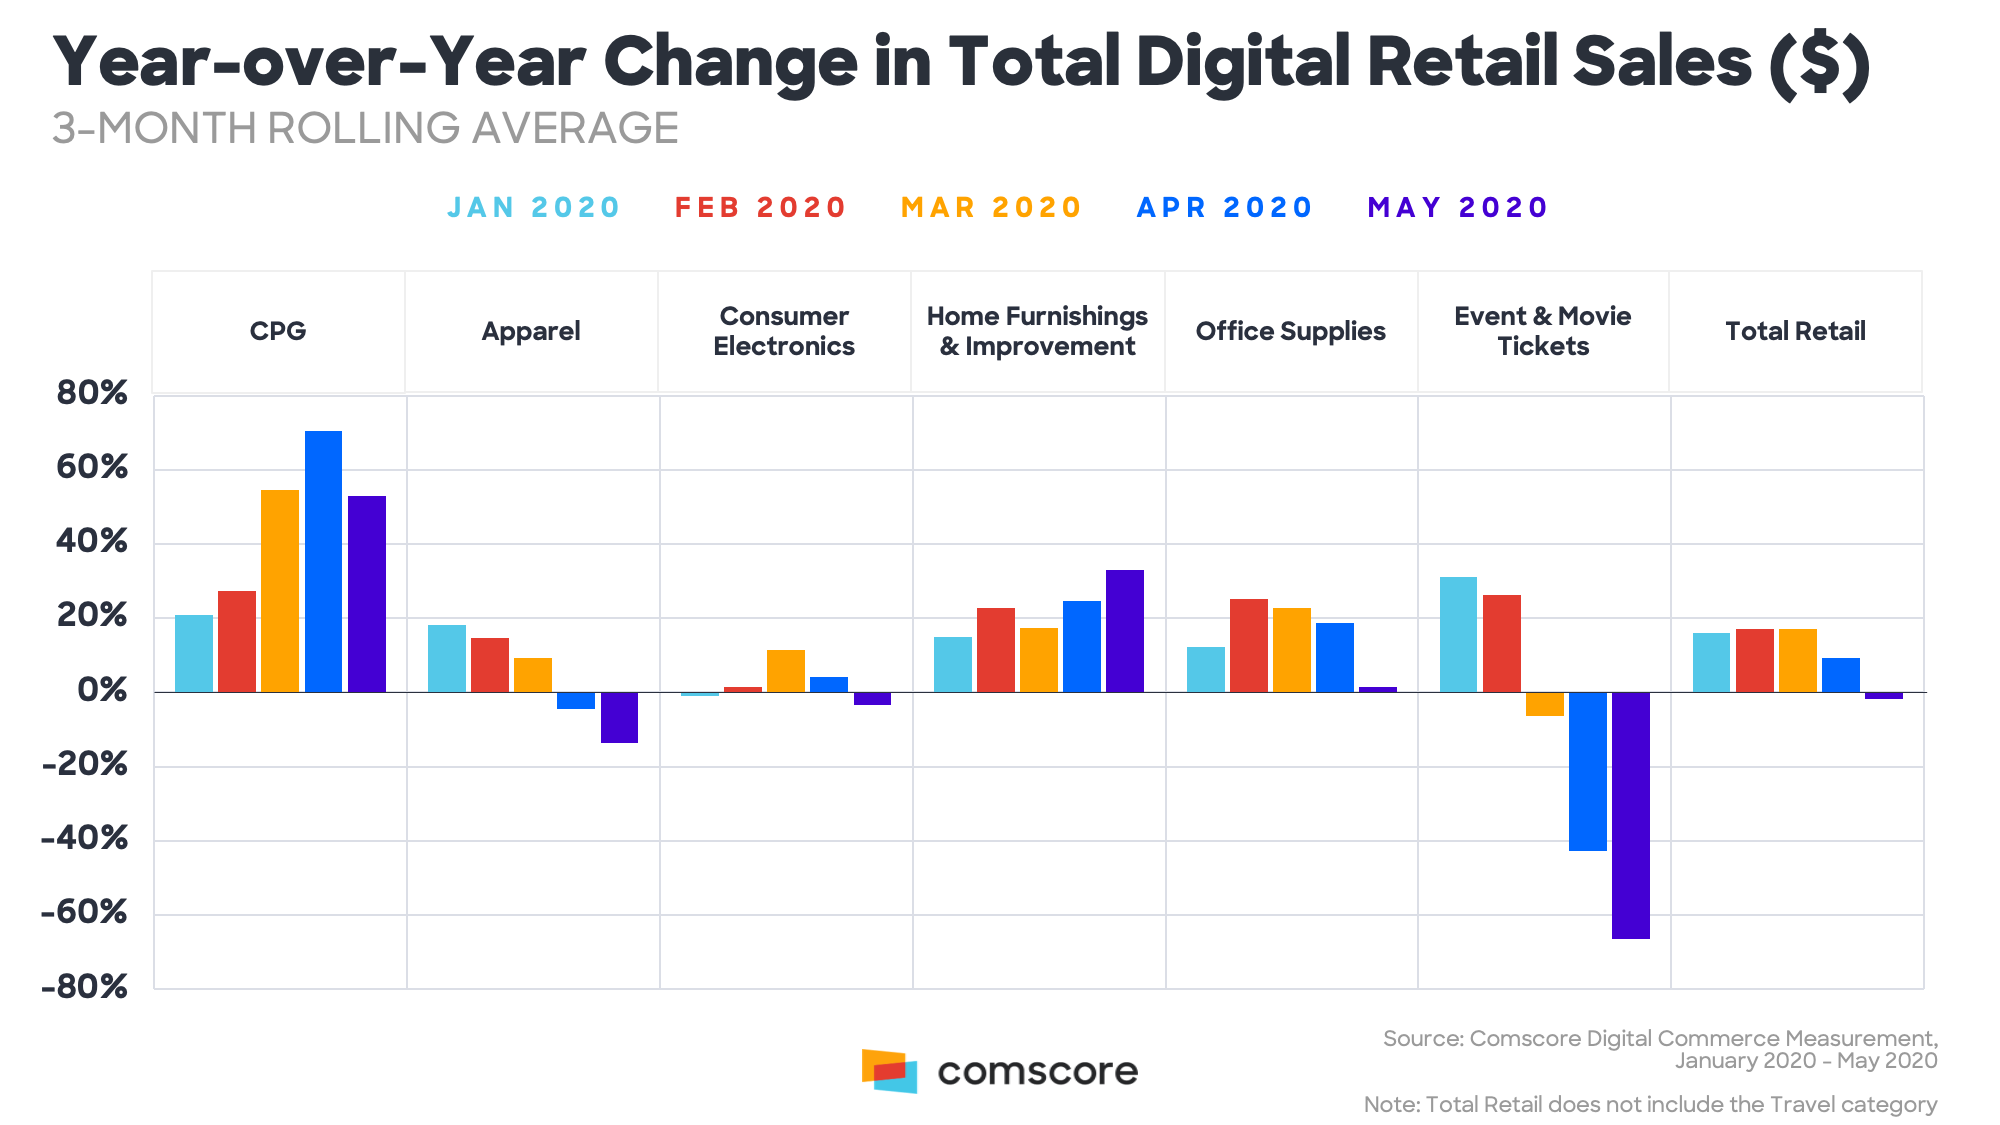 Year-over-Year Change in Total Digital Retail Sales